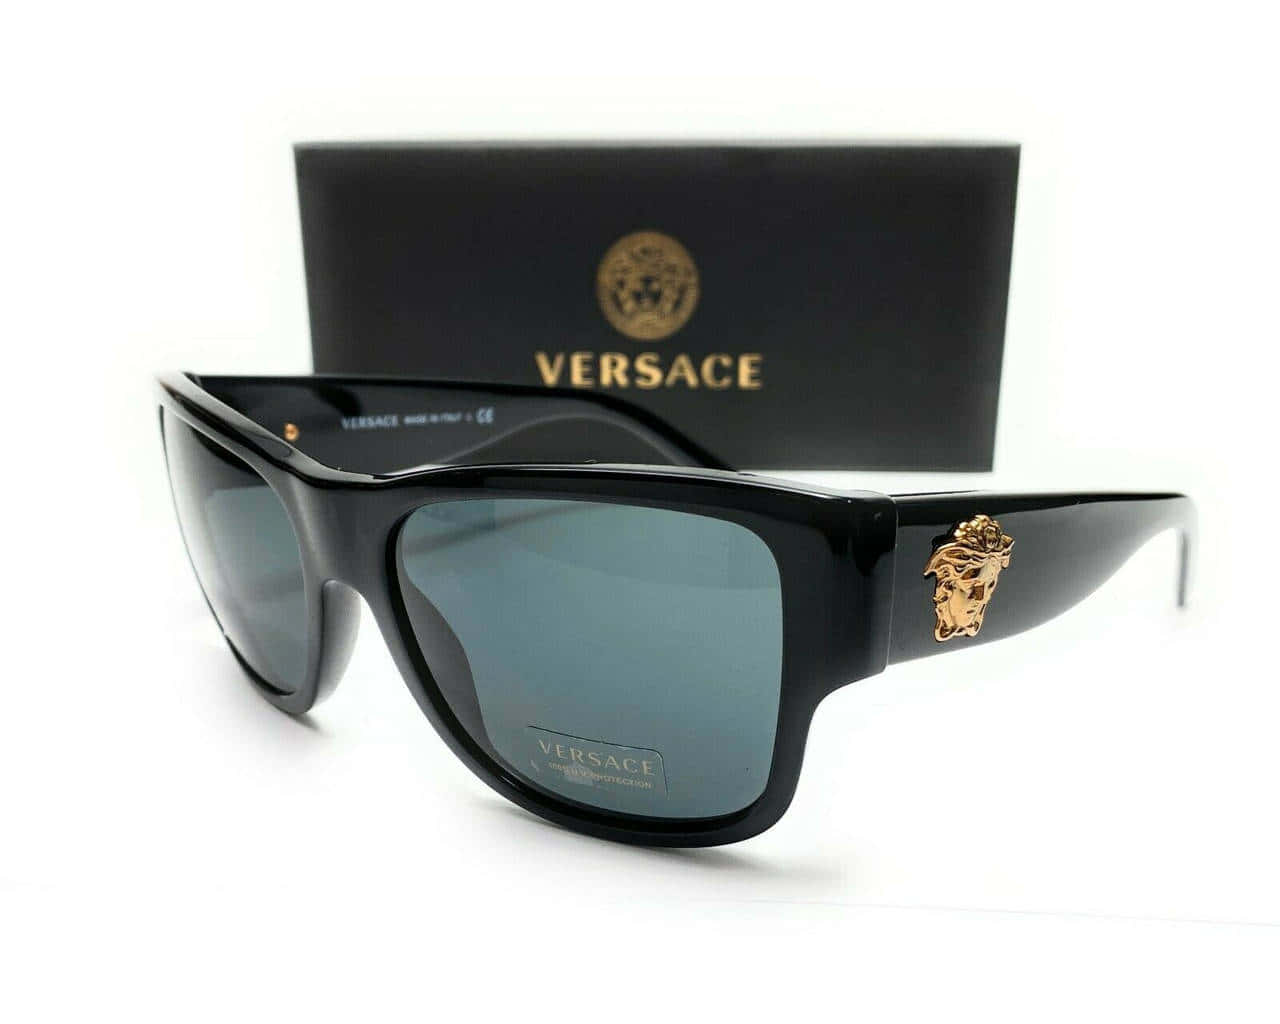 Download Embrace luxury with the Versace lifestyle | Wallpapers.com